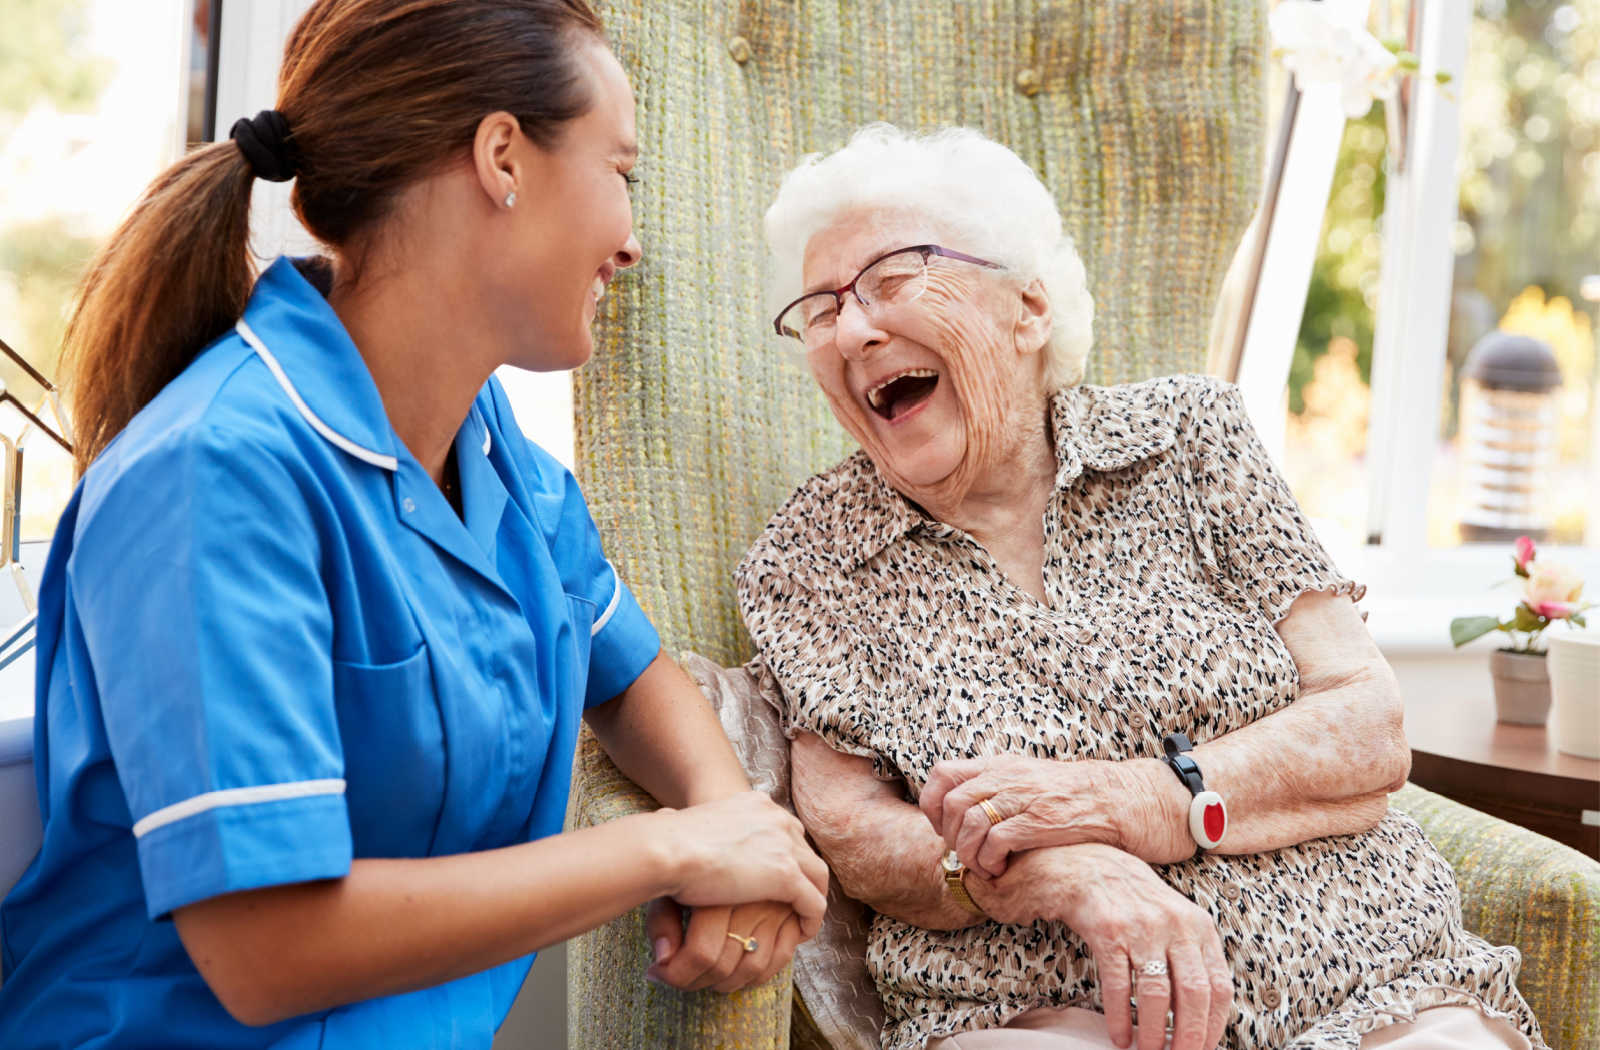 A senior woman in a senior living community sitting on a chair smiling and laughing with a young female nurse.